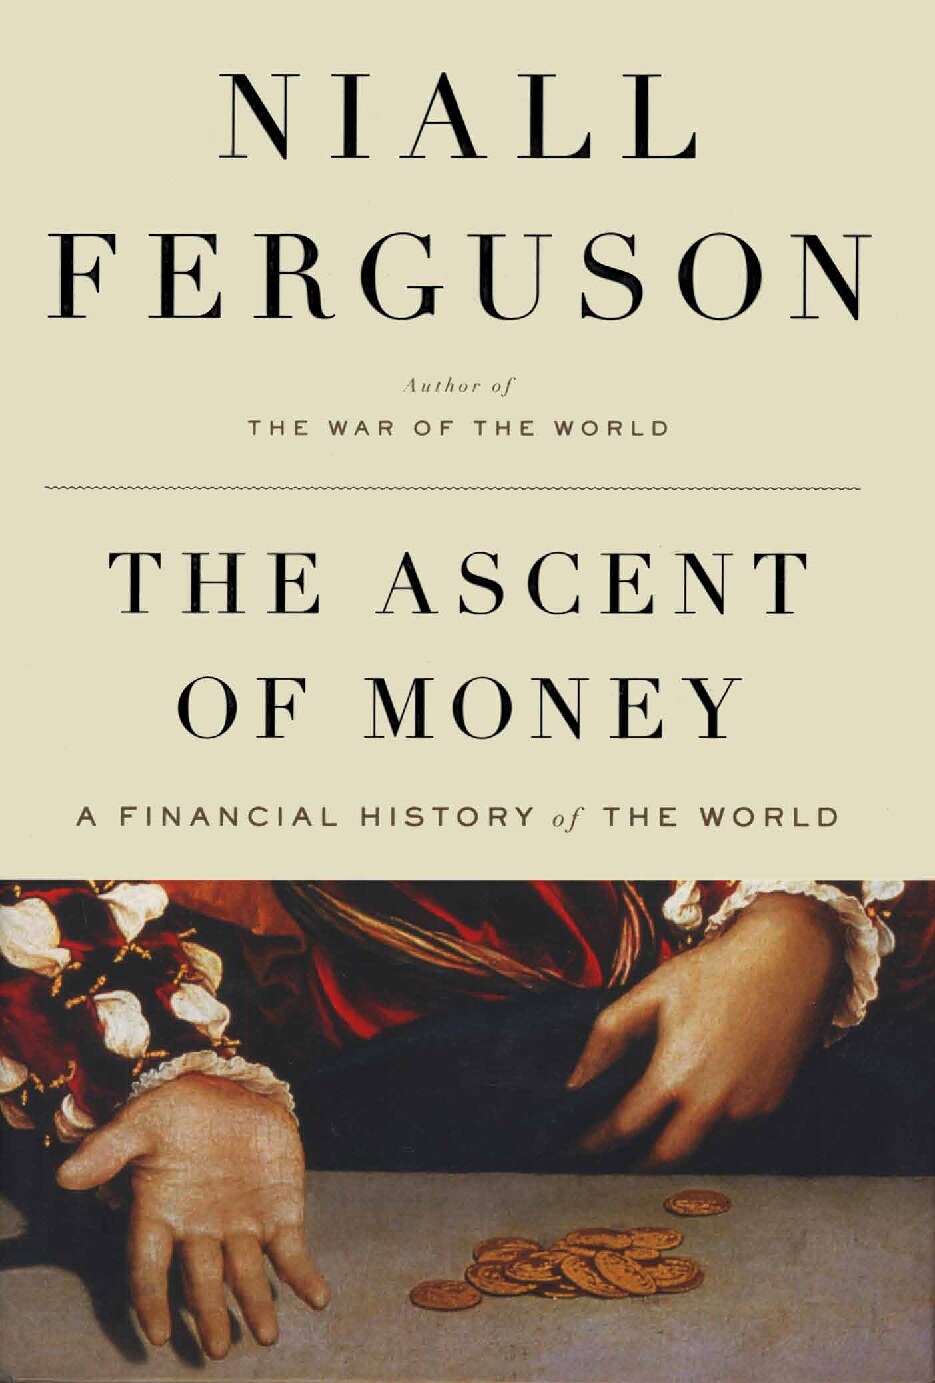 The Ascent of Money: A Financial History of the World (Penguin Press; 2008)